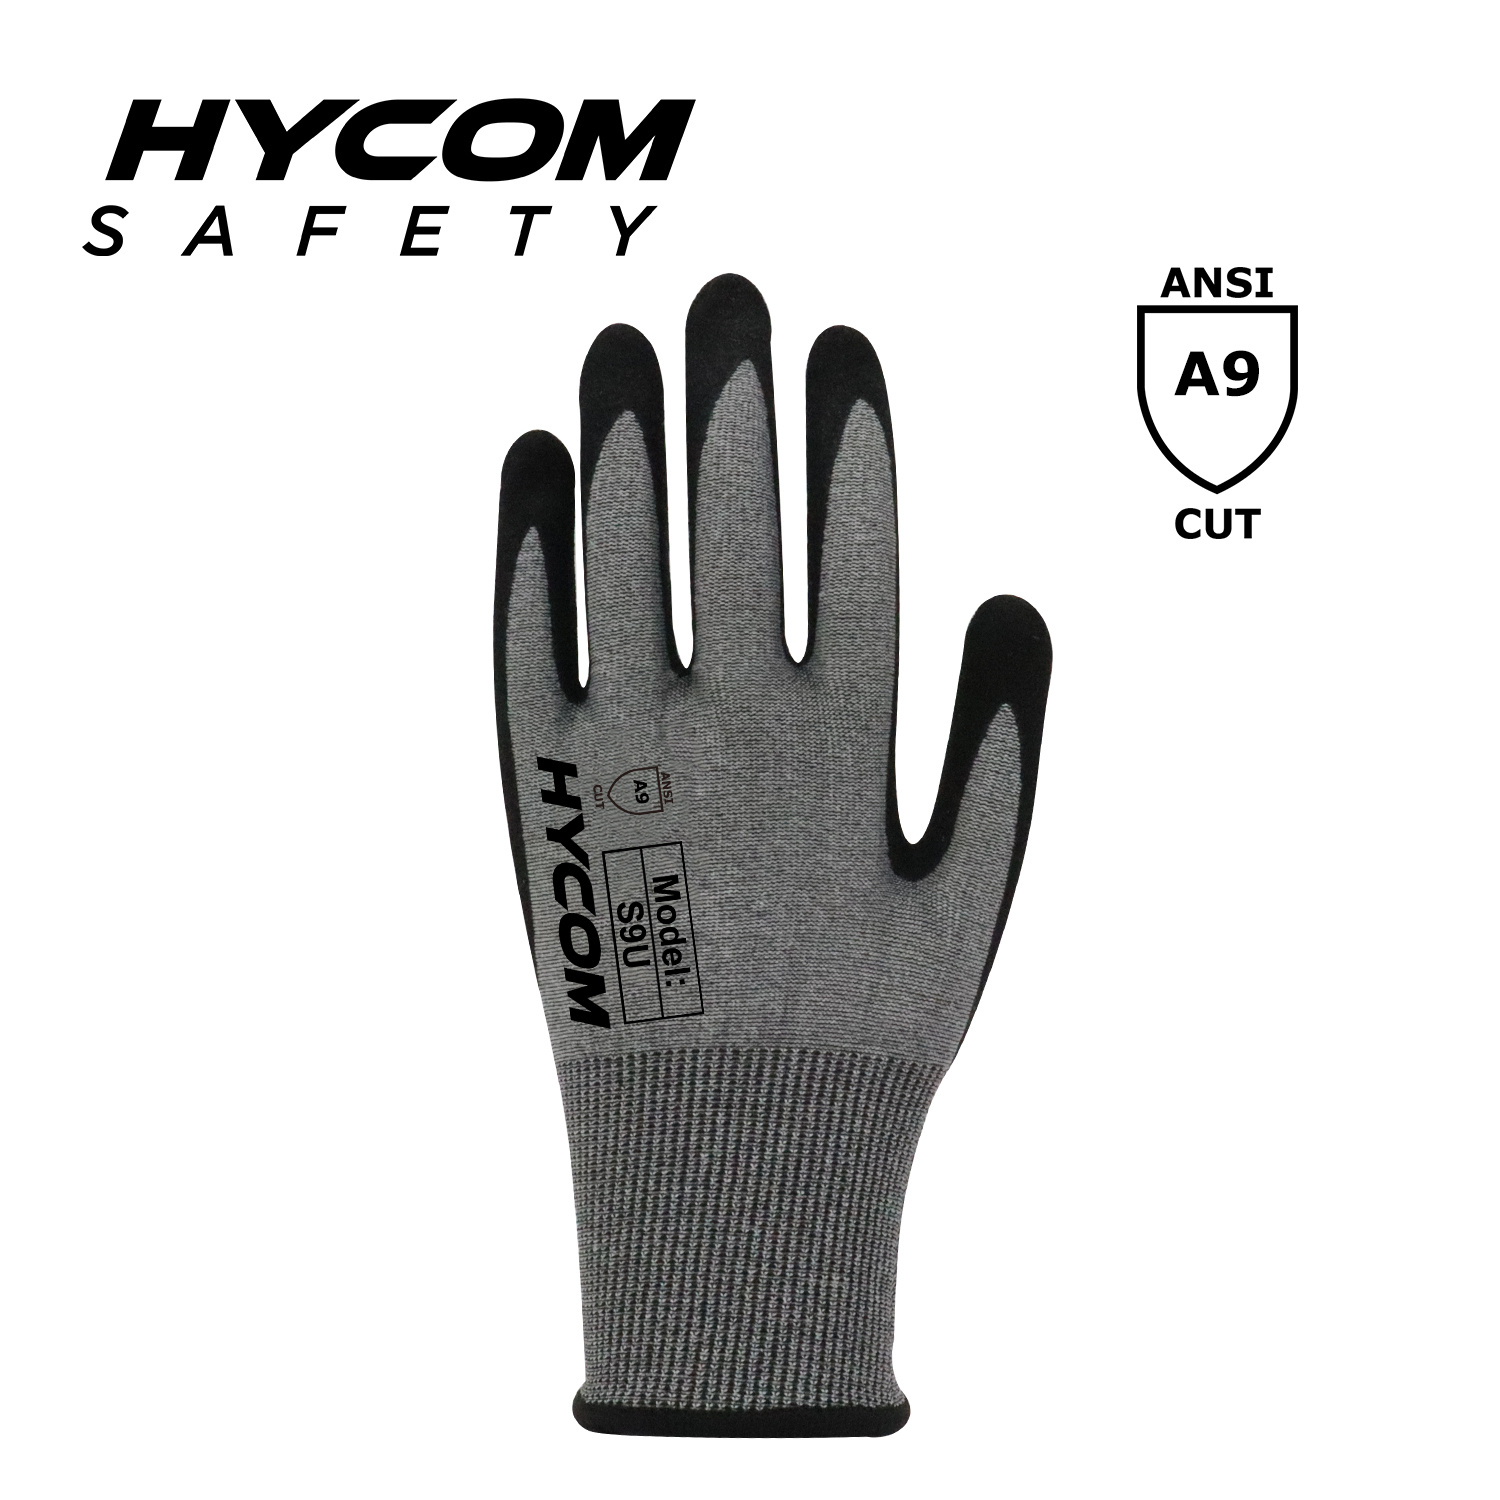 HYCOM 18G ANSI 9 Cut Resistant Glove with Palm HT Sandy Nitrile Coating Super Thinner PPE Gloves